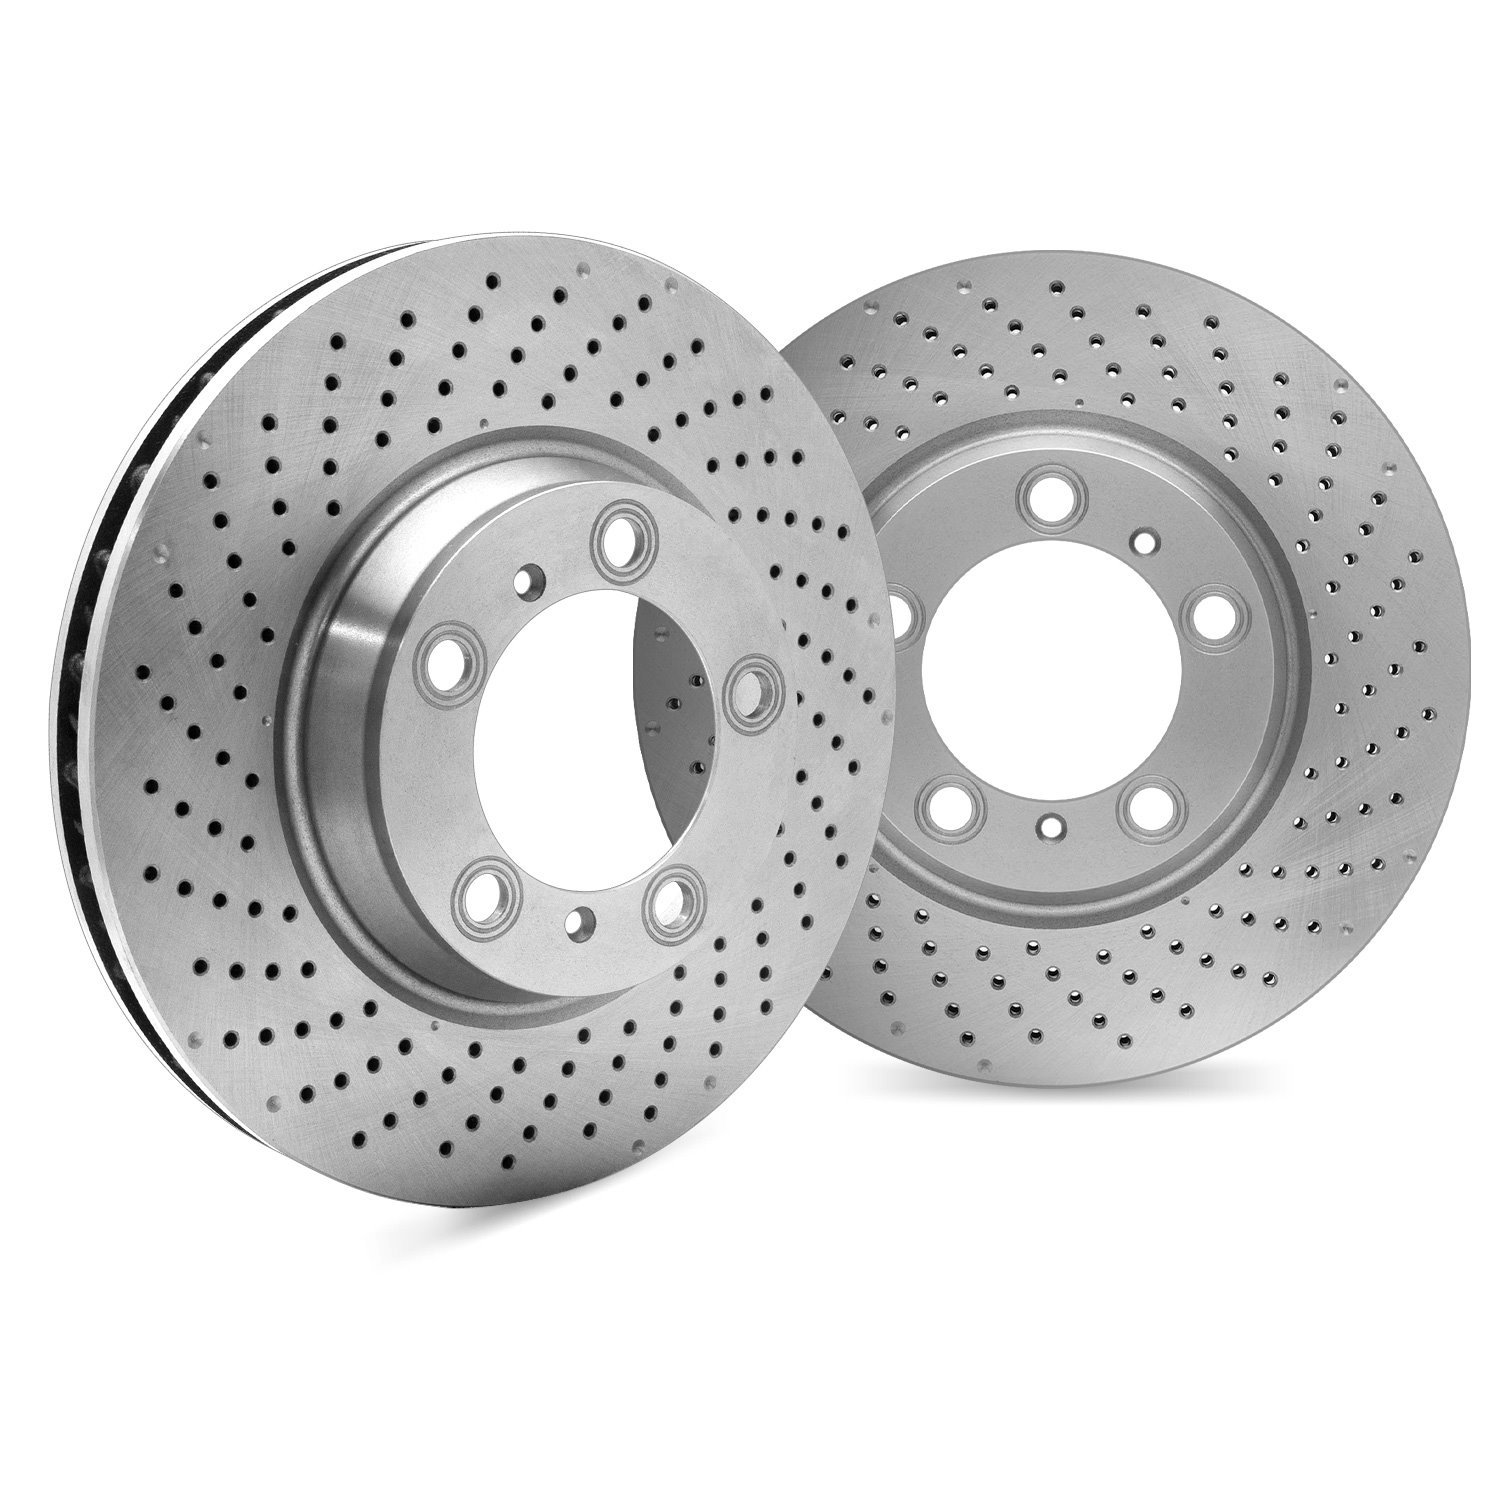 6002-31155 Brake Rotors, Fits Select BMW, Position: Front